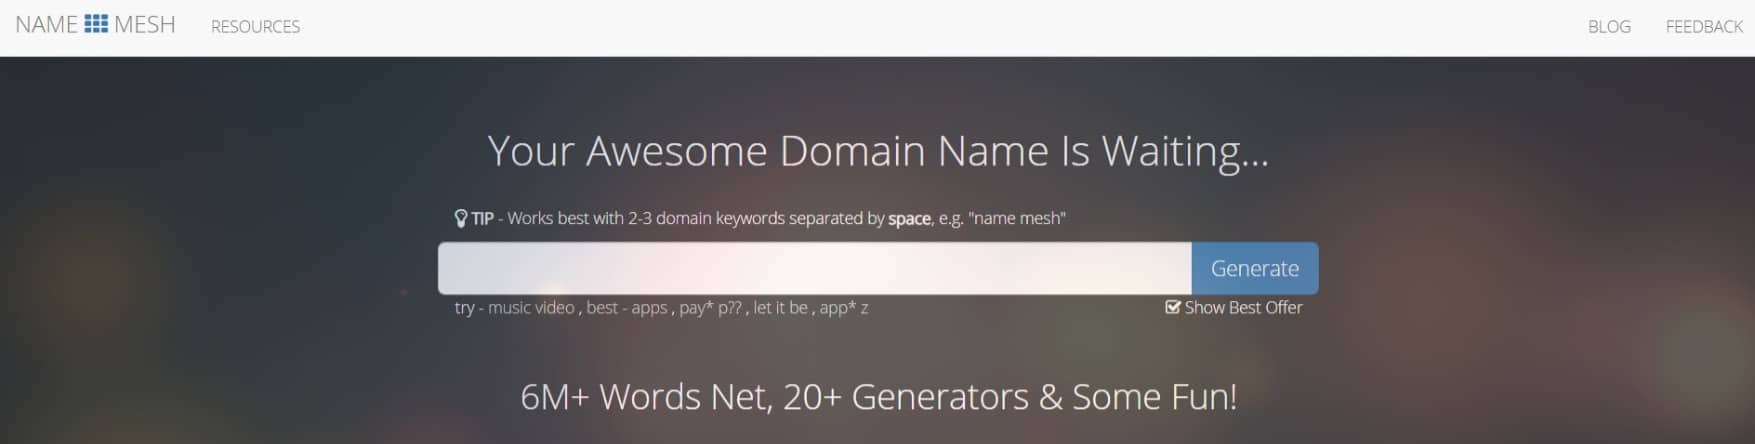 Name Mesh: Domain Name Generator For Perfectionists